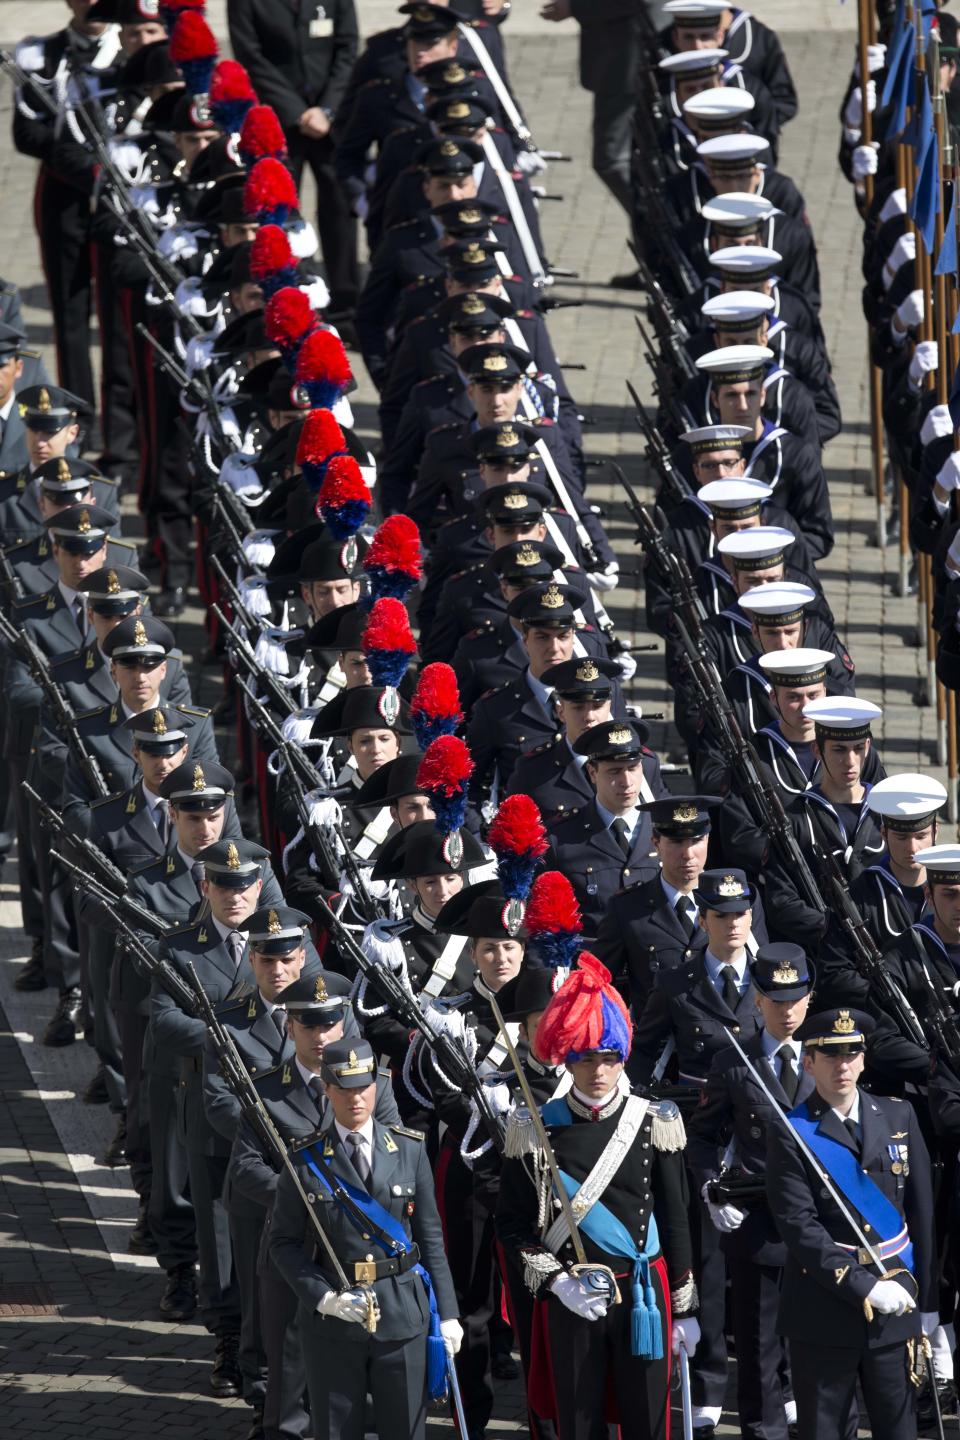 Different Italian armed forces officers parade ahead of Pope Francis' Easter Mass in St. Peter's Square at the the Vatican, Sunday, April 20, 2014. (AP Photo/Alessandra Tarantino)